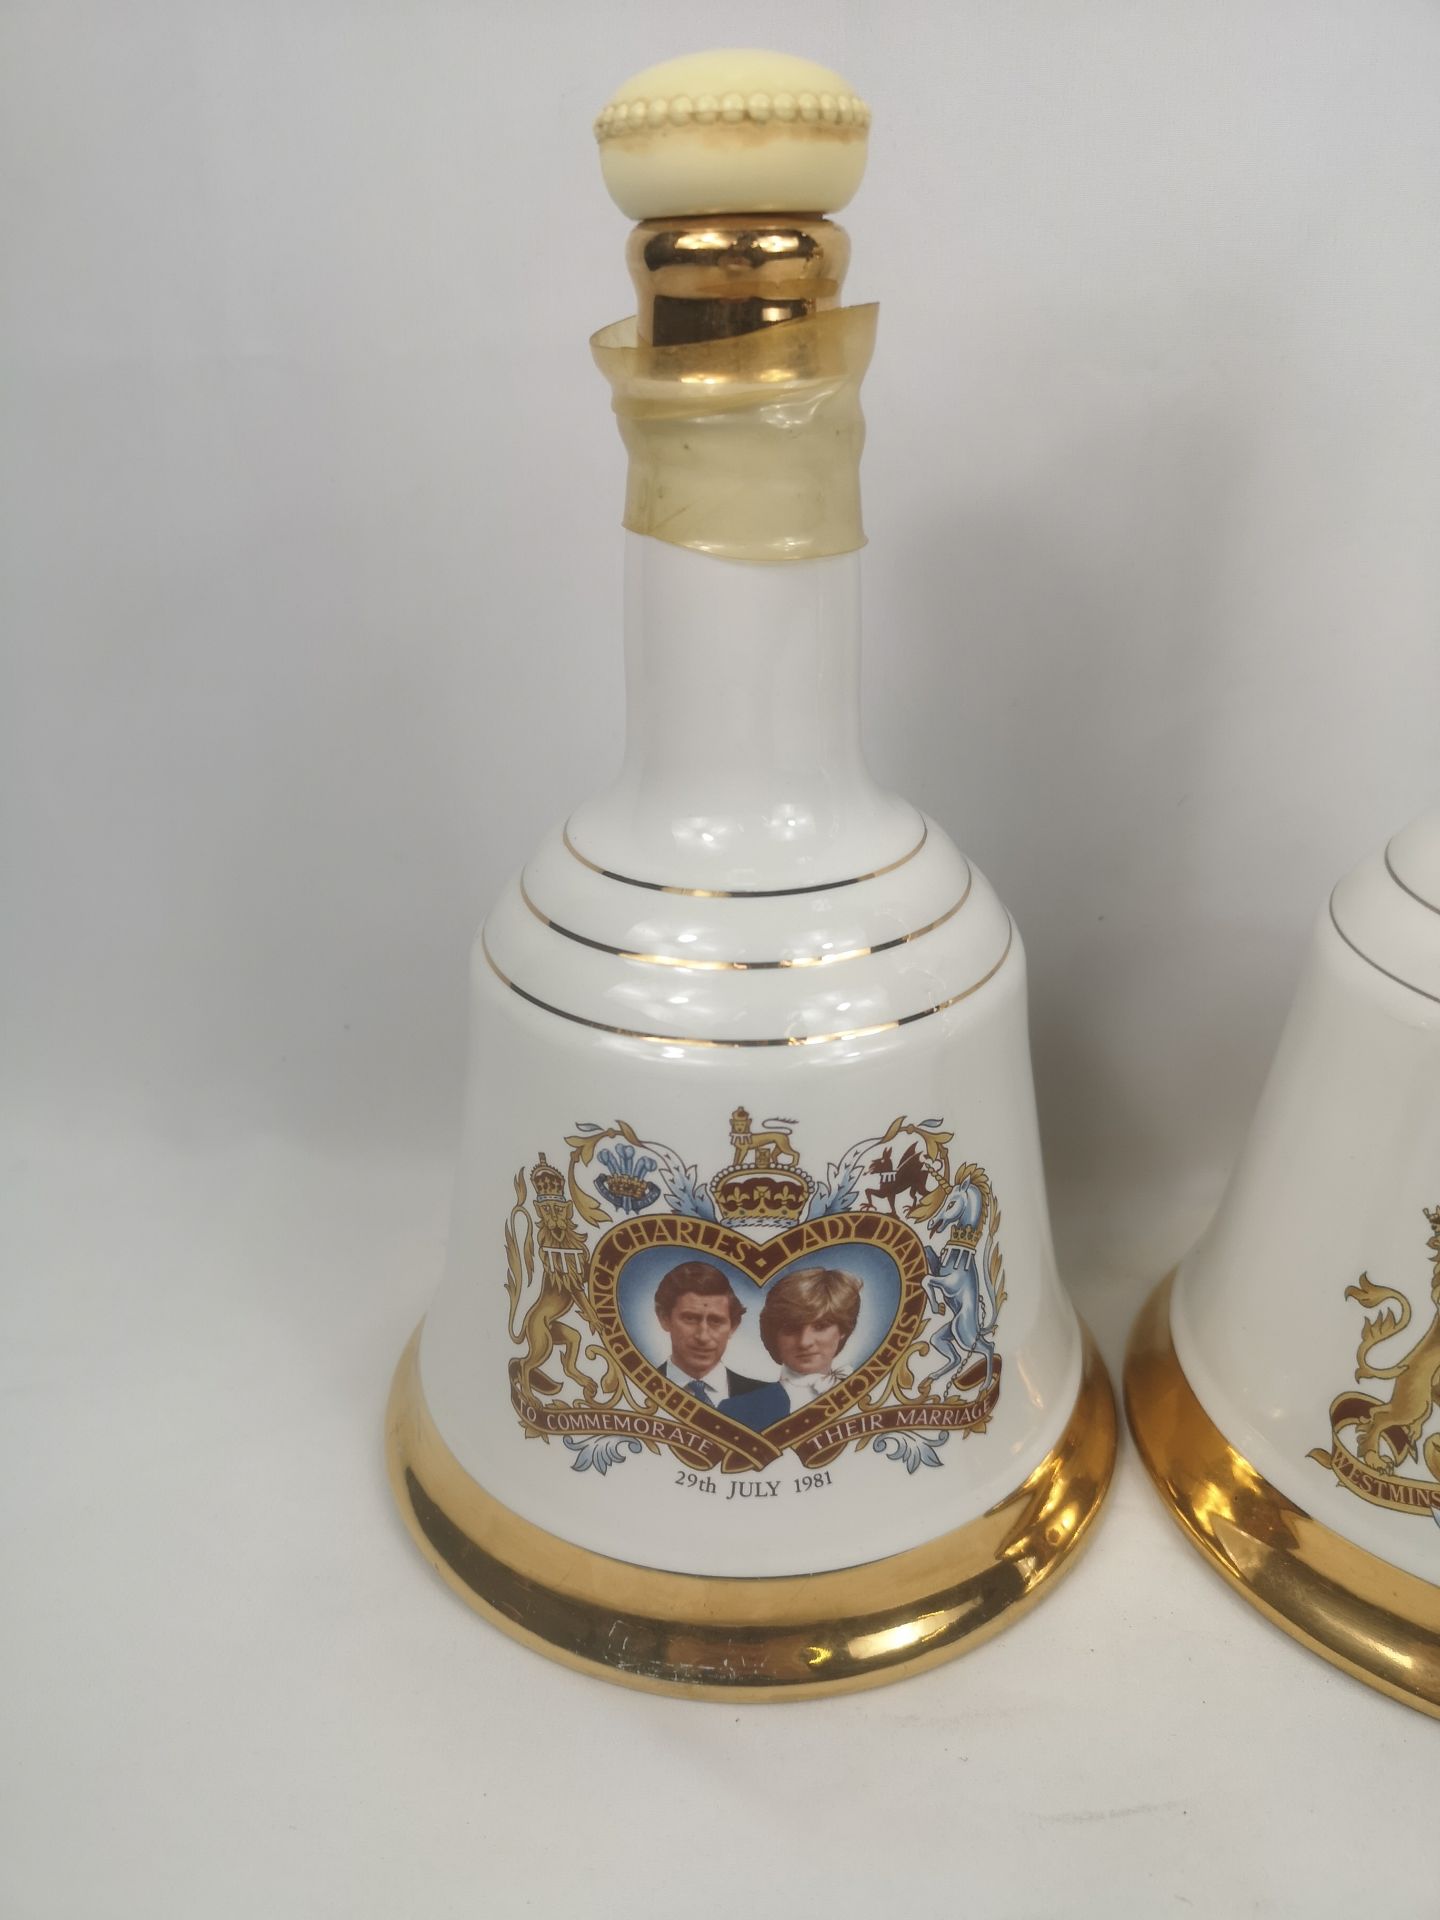 Three Bells porcelain whisky decanters, bottle of House of Commons Armagnac - Image 2 of 6